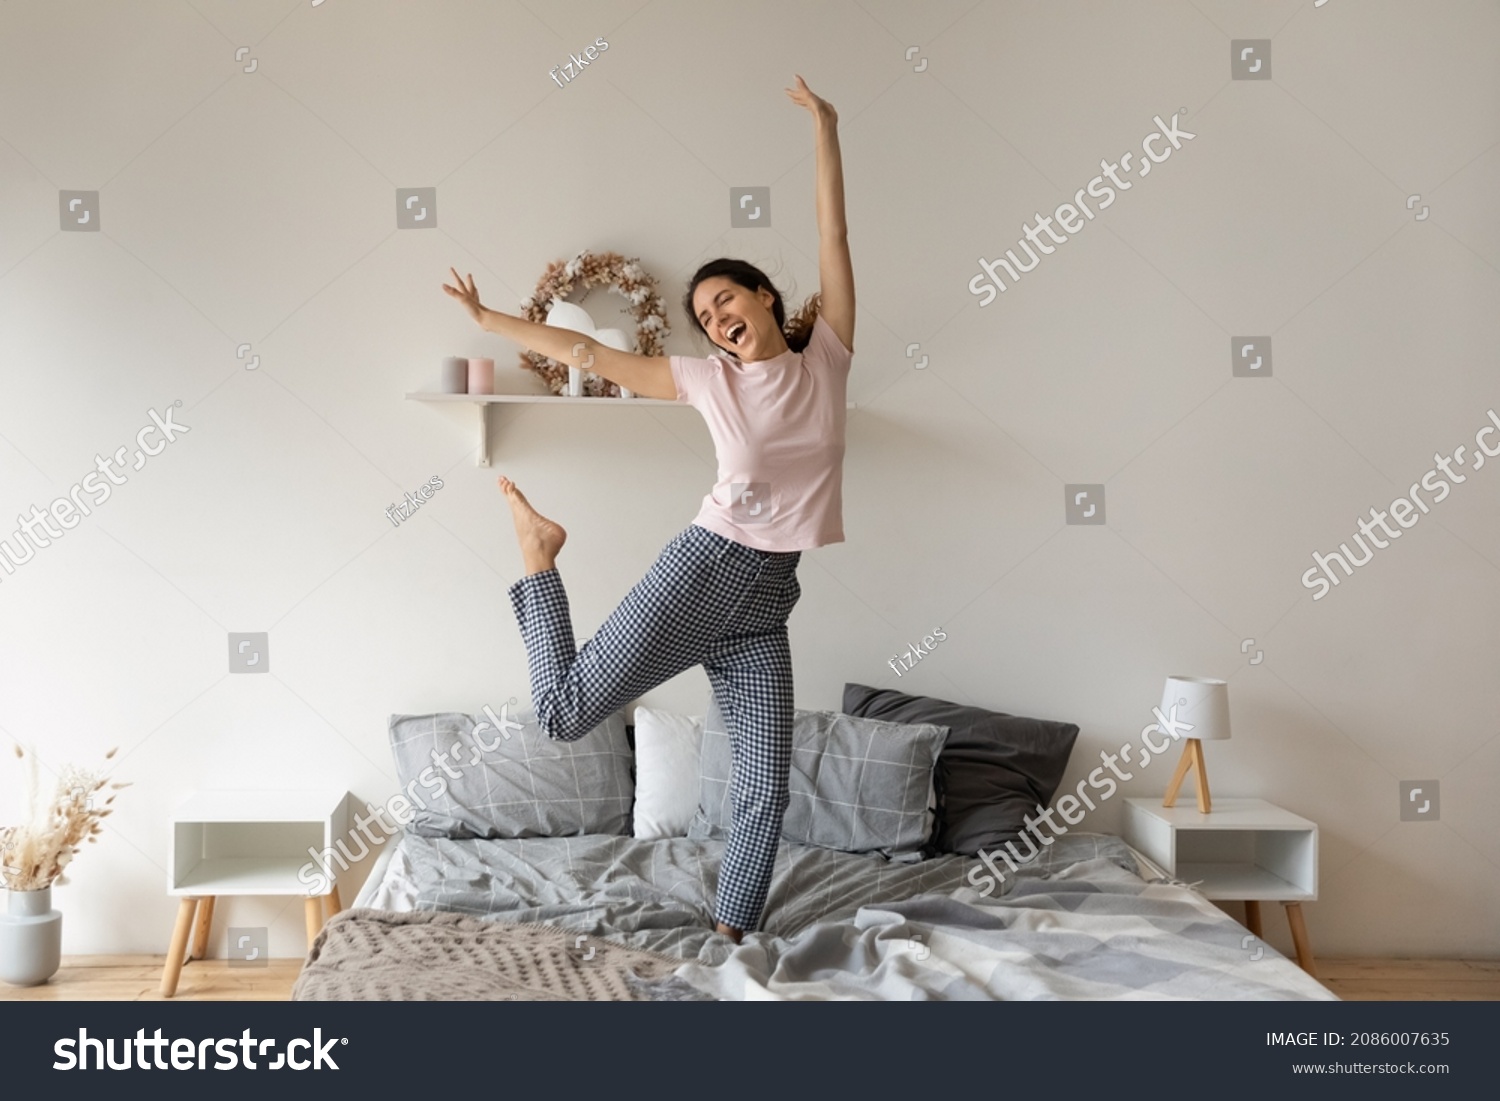 Overjoyed funny woman jumping on comfortable cozy bed at home, enjoying morning, starting new day, excited happy young female wearing pajama dancing to favorite music, having fun in modern bedroom #2086007635